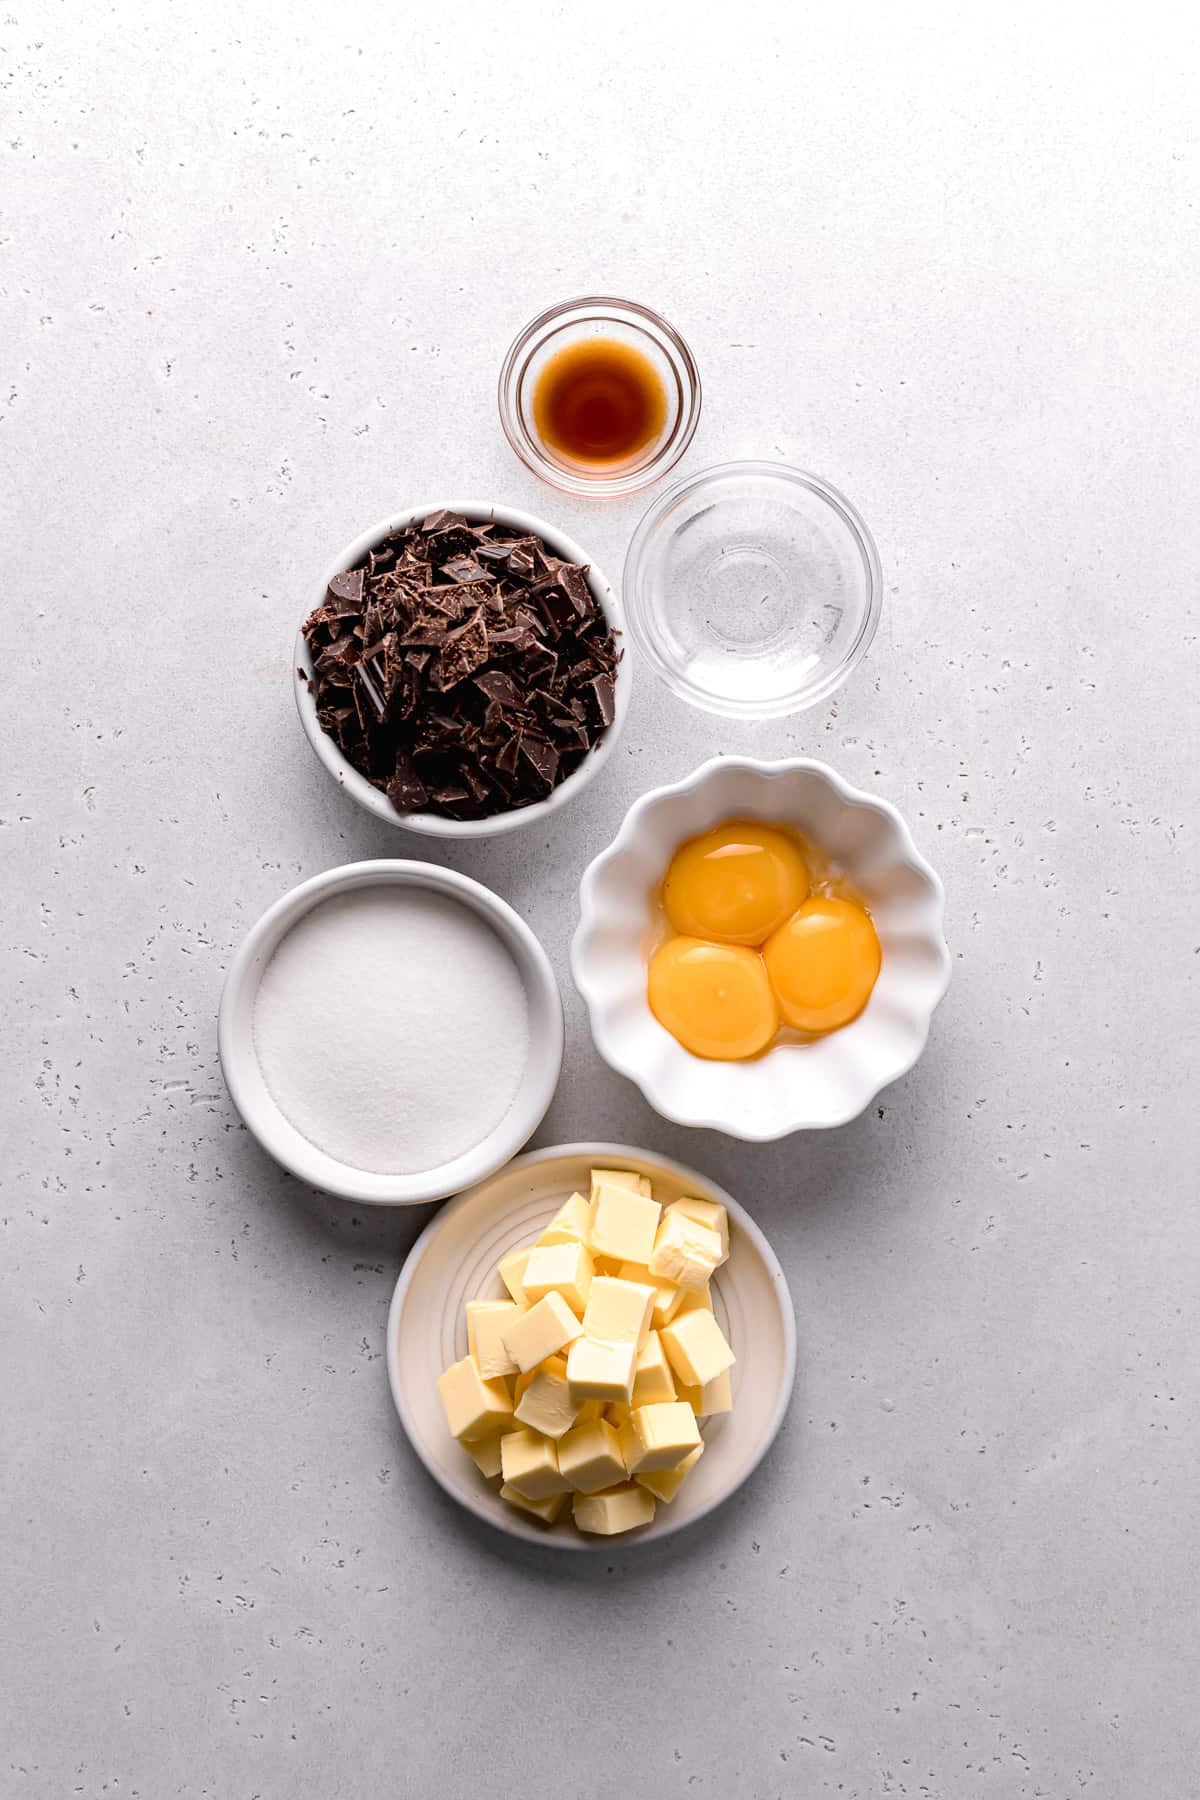 ingredients for chocolate French buttercream.